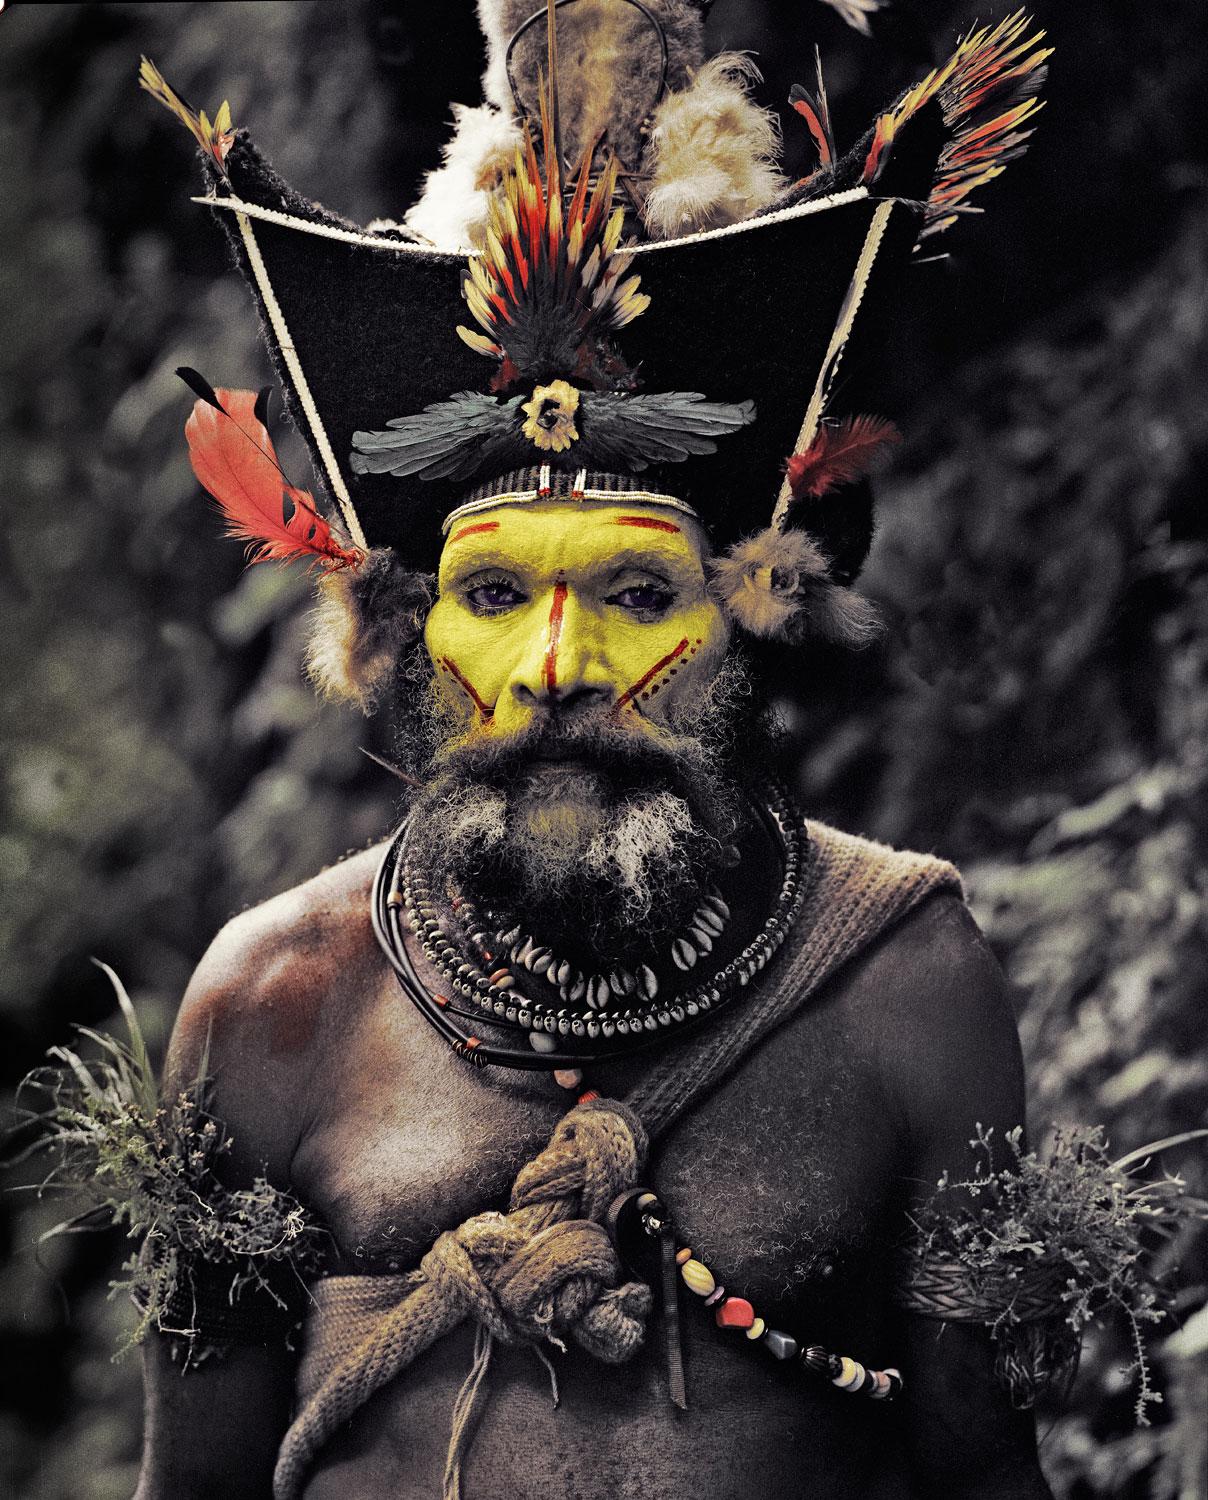 "XV 65 - Kati Hirawako - Huli Wig men - Ambua Falls, Tari Valley - Papua New Guinea, 2010

Papua is where we started our two-month trip in Oceania. As a region it’s a lot easier to travel through than New Guinea, because it’s part of Indonesia and